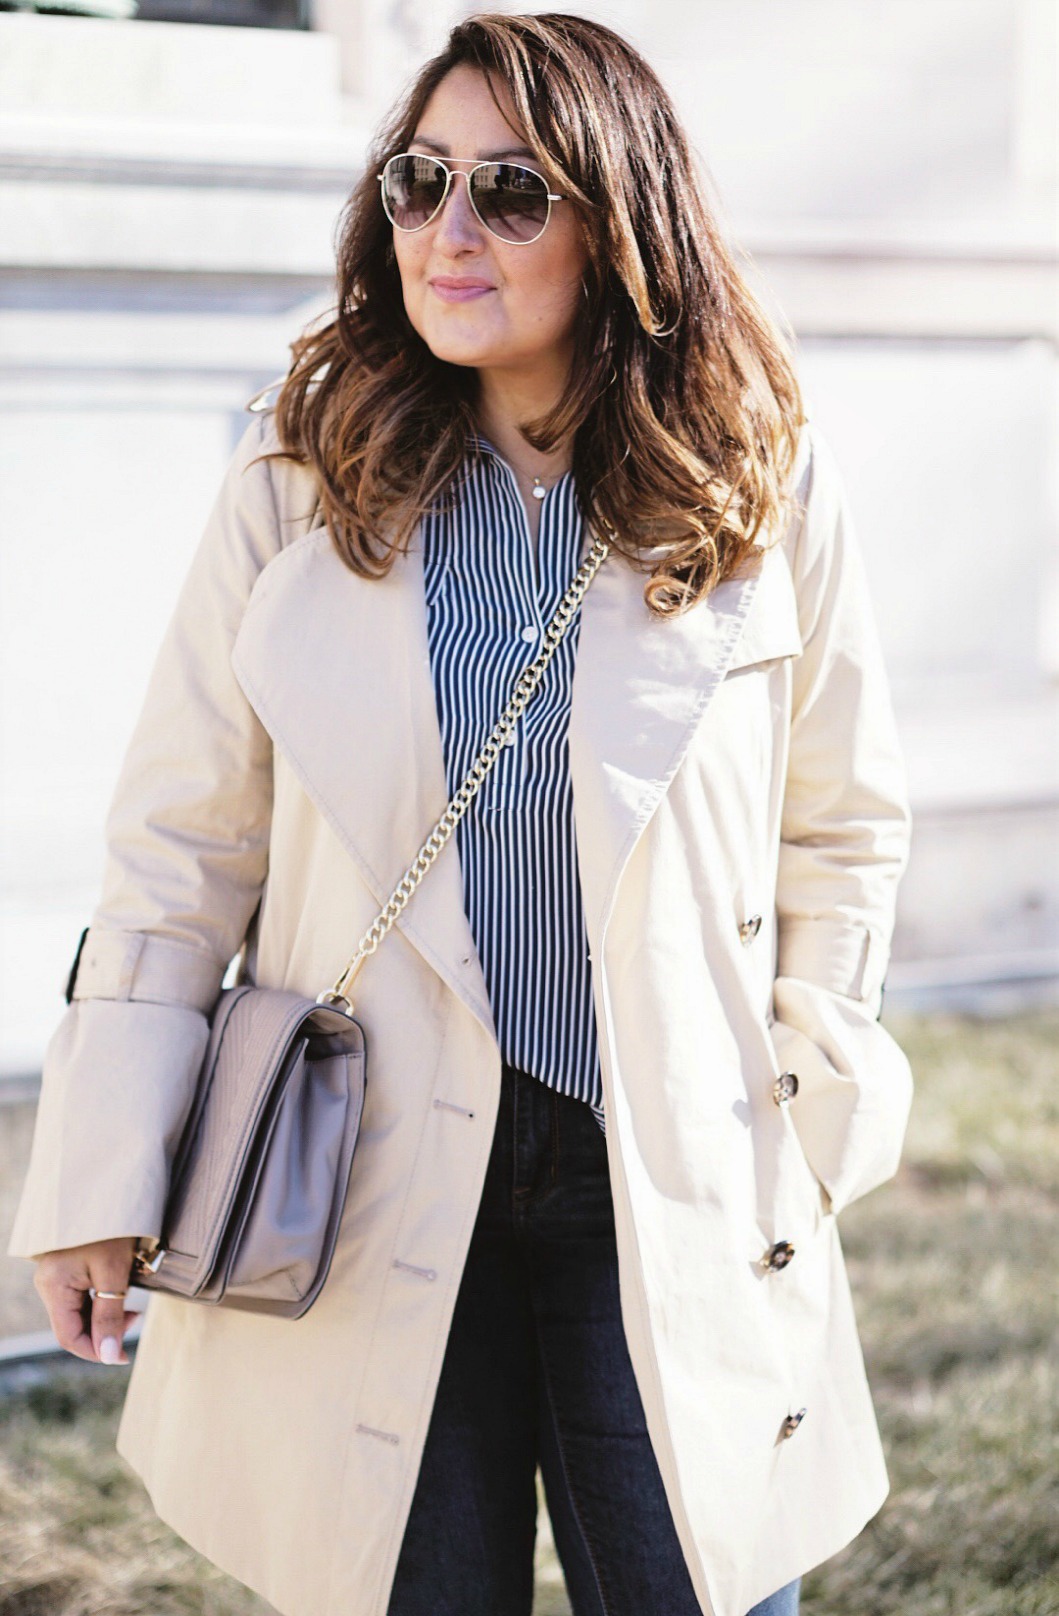 Banana Republic trench coat for a casual look.